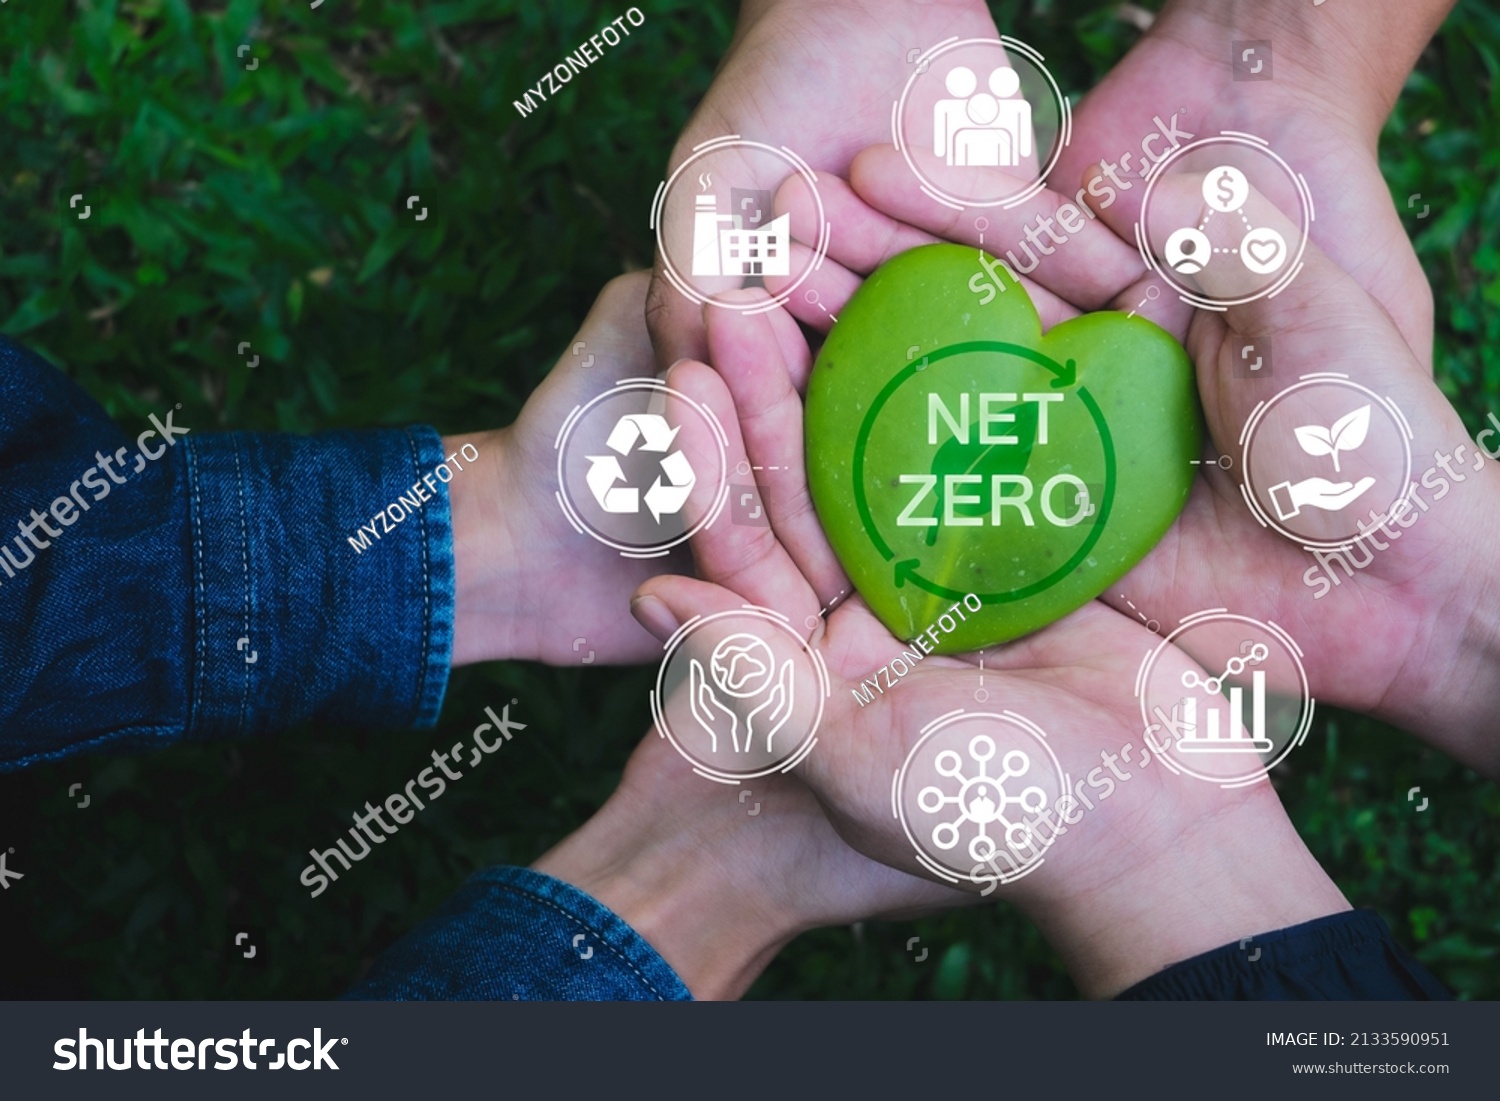 Net zero and carbon neutral concept. Hands adult Teamwork harmony Holding heart leaf on hands with green net zero icon and green icon. Net zero greenhouse gas emissions target. #2133590951